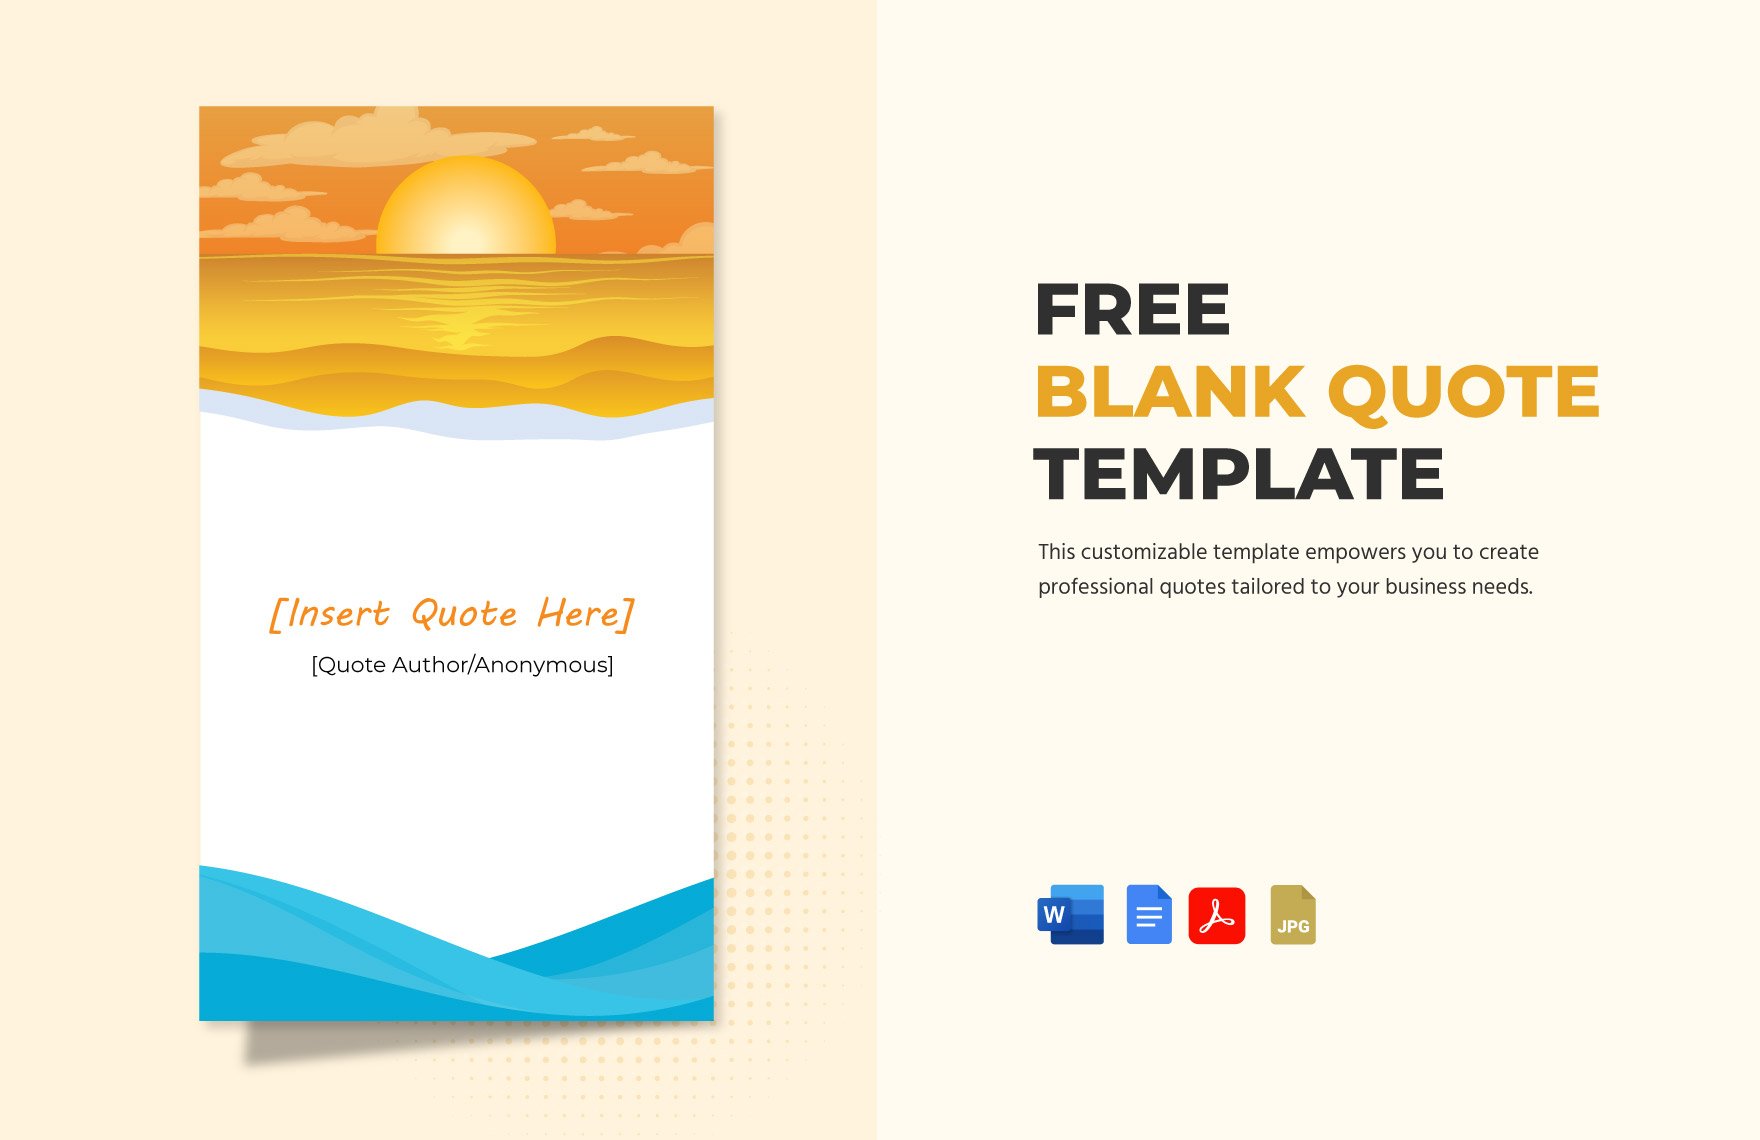 Free Blank Quote Template in Word, Google Docs, PDF, JPG